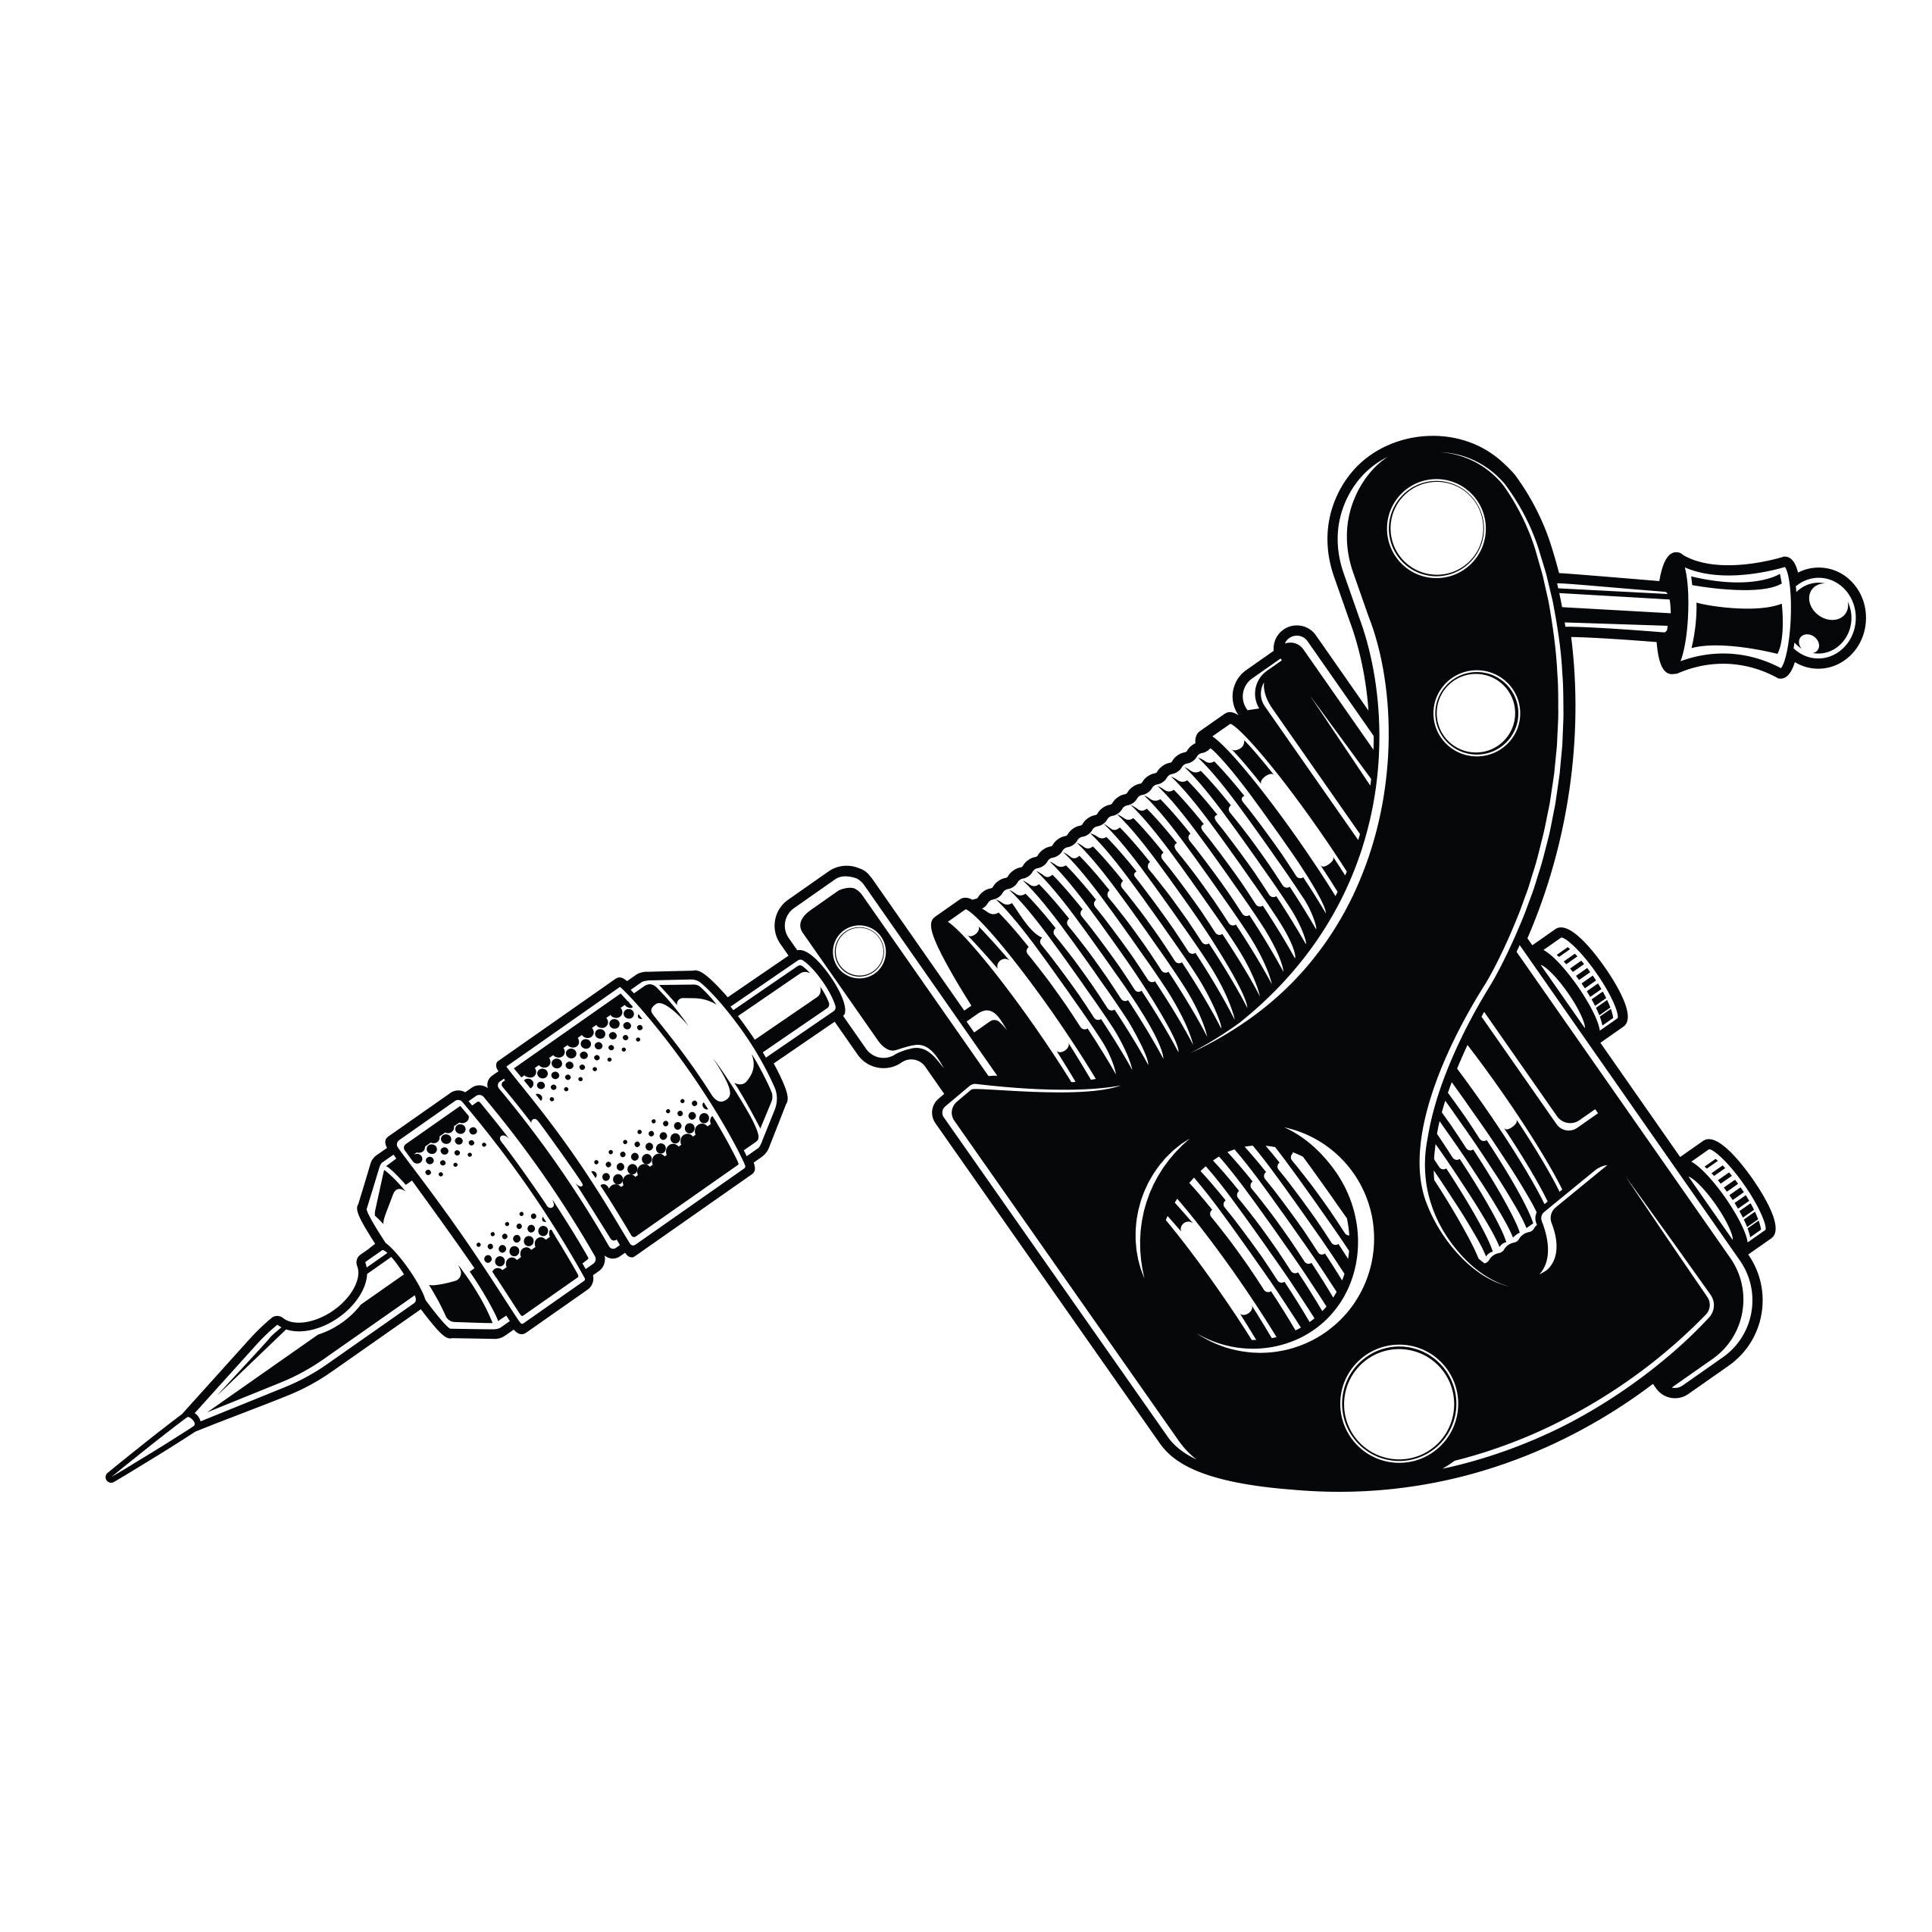 Tattoo Machine Stock Vector Illustration and Royalty Free Tattoo Machine  Clipart